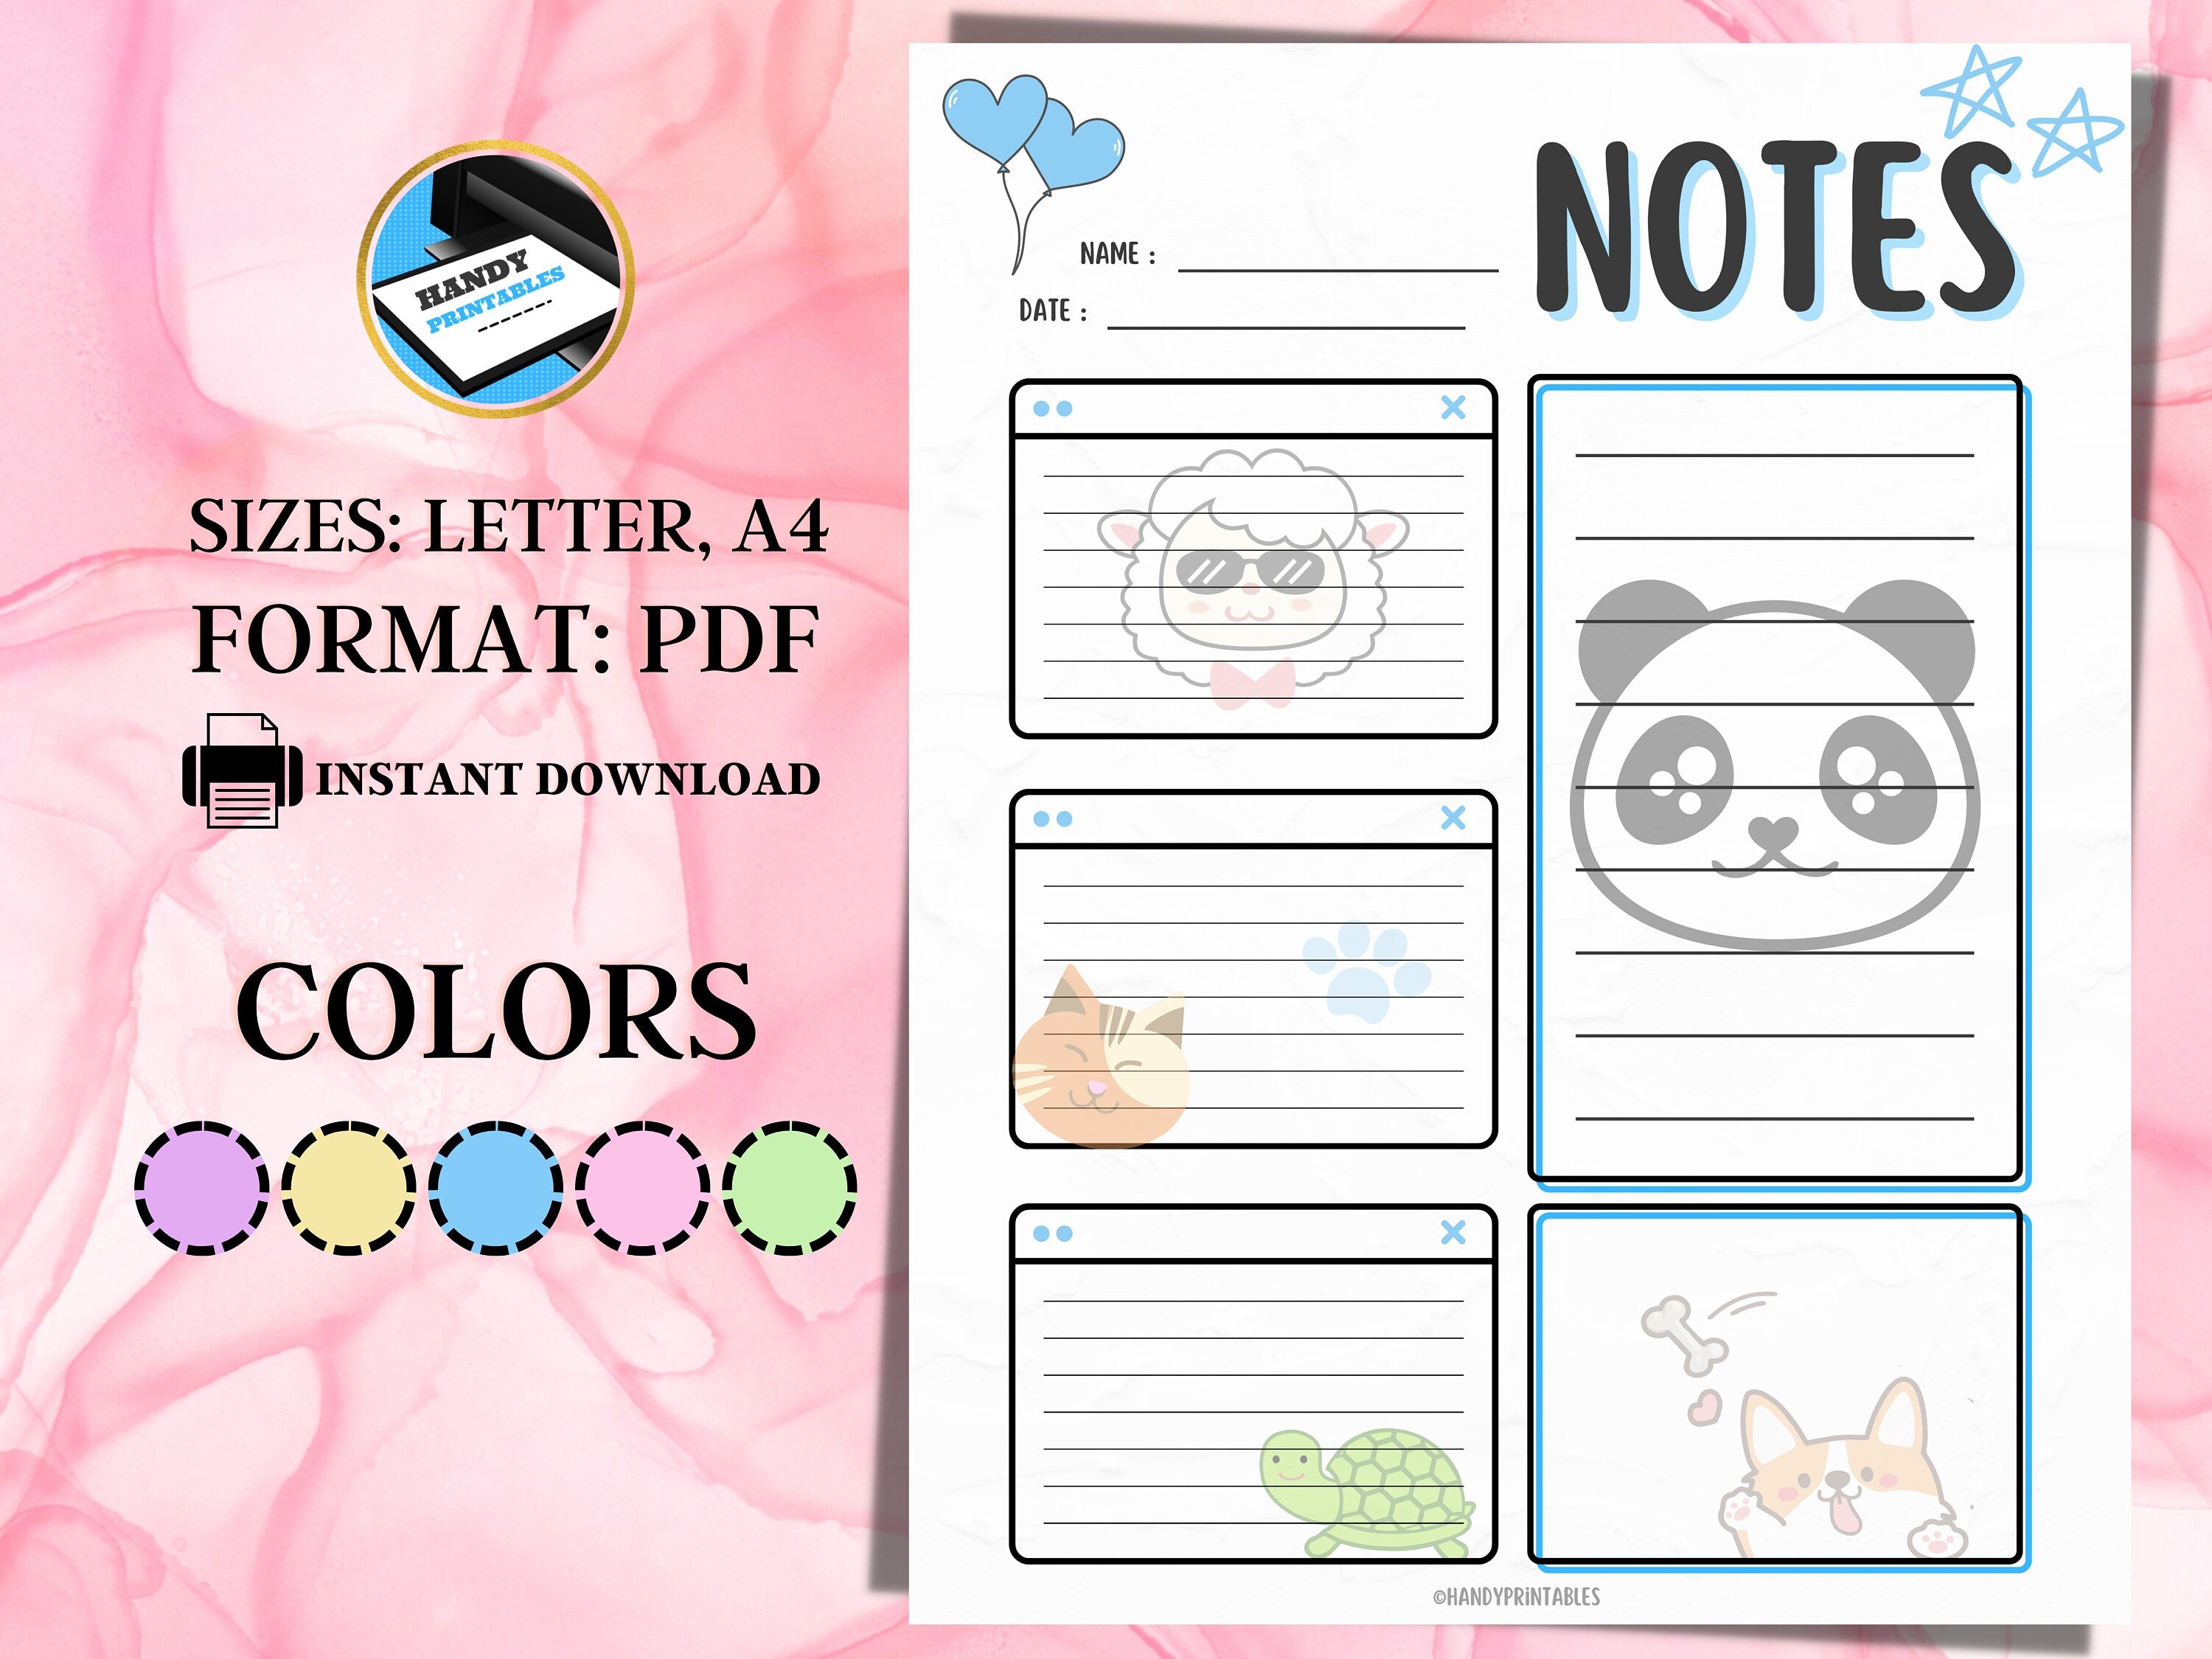 Notes Page Printable ,Planner Insert Notes, Kawaii Notes, Lined Notepad Paper, Animal Themed Notes, Cute Notes printable, INSTANT DOWNLOAD - HandyPrintables